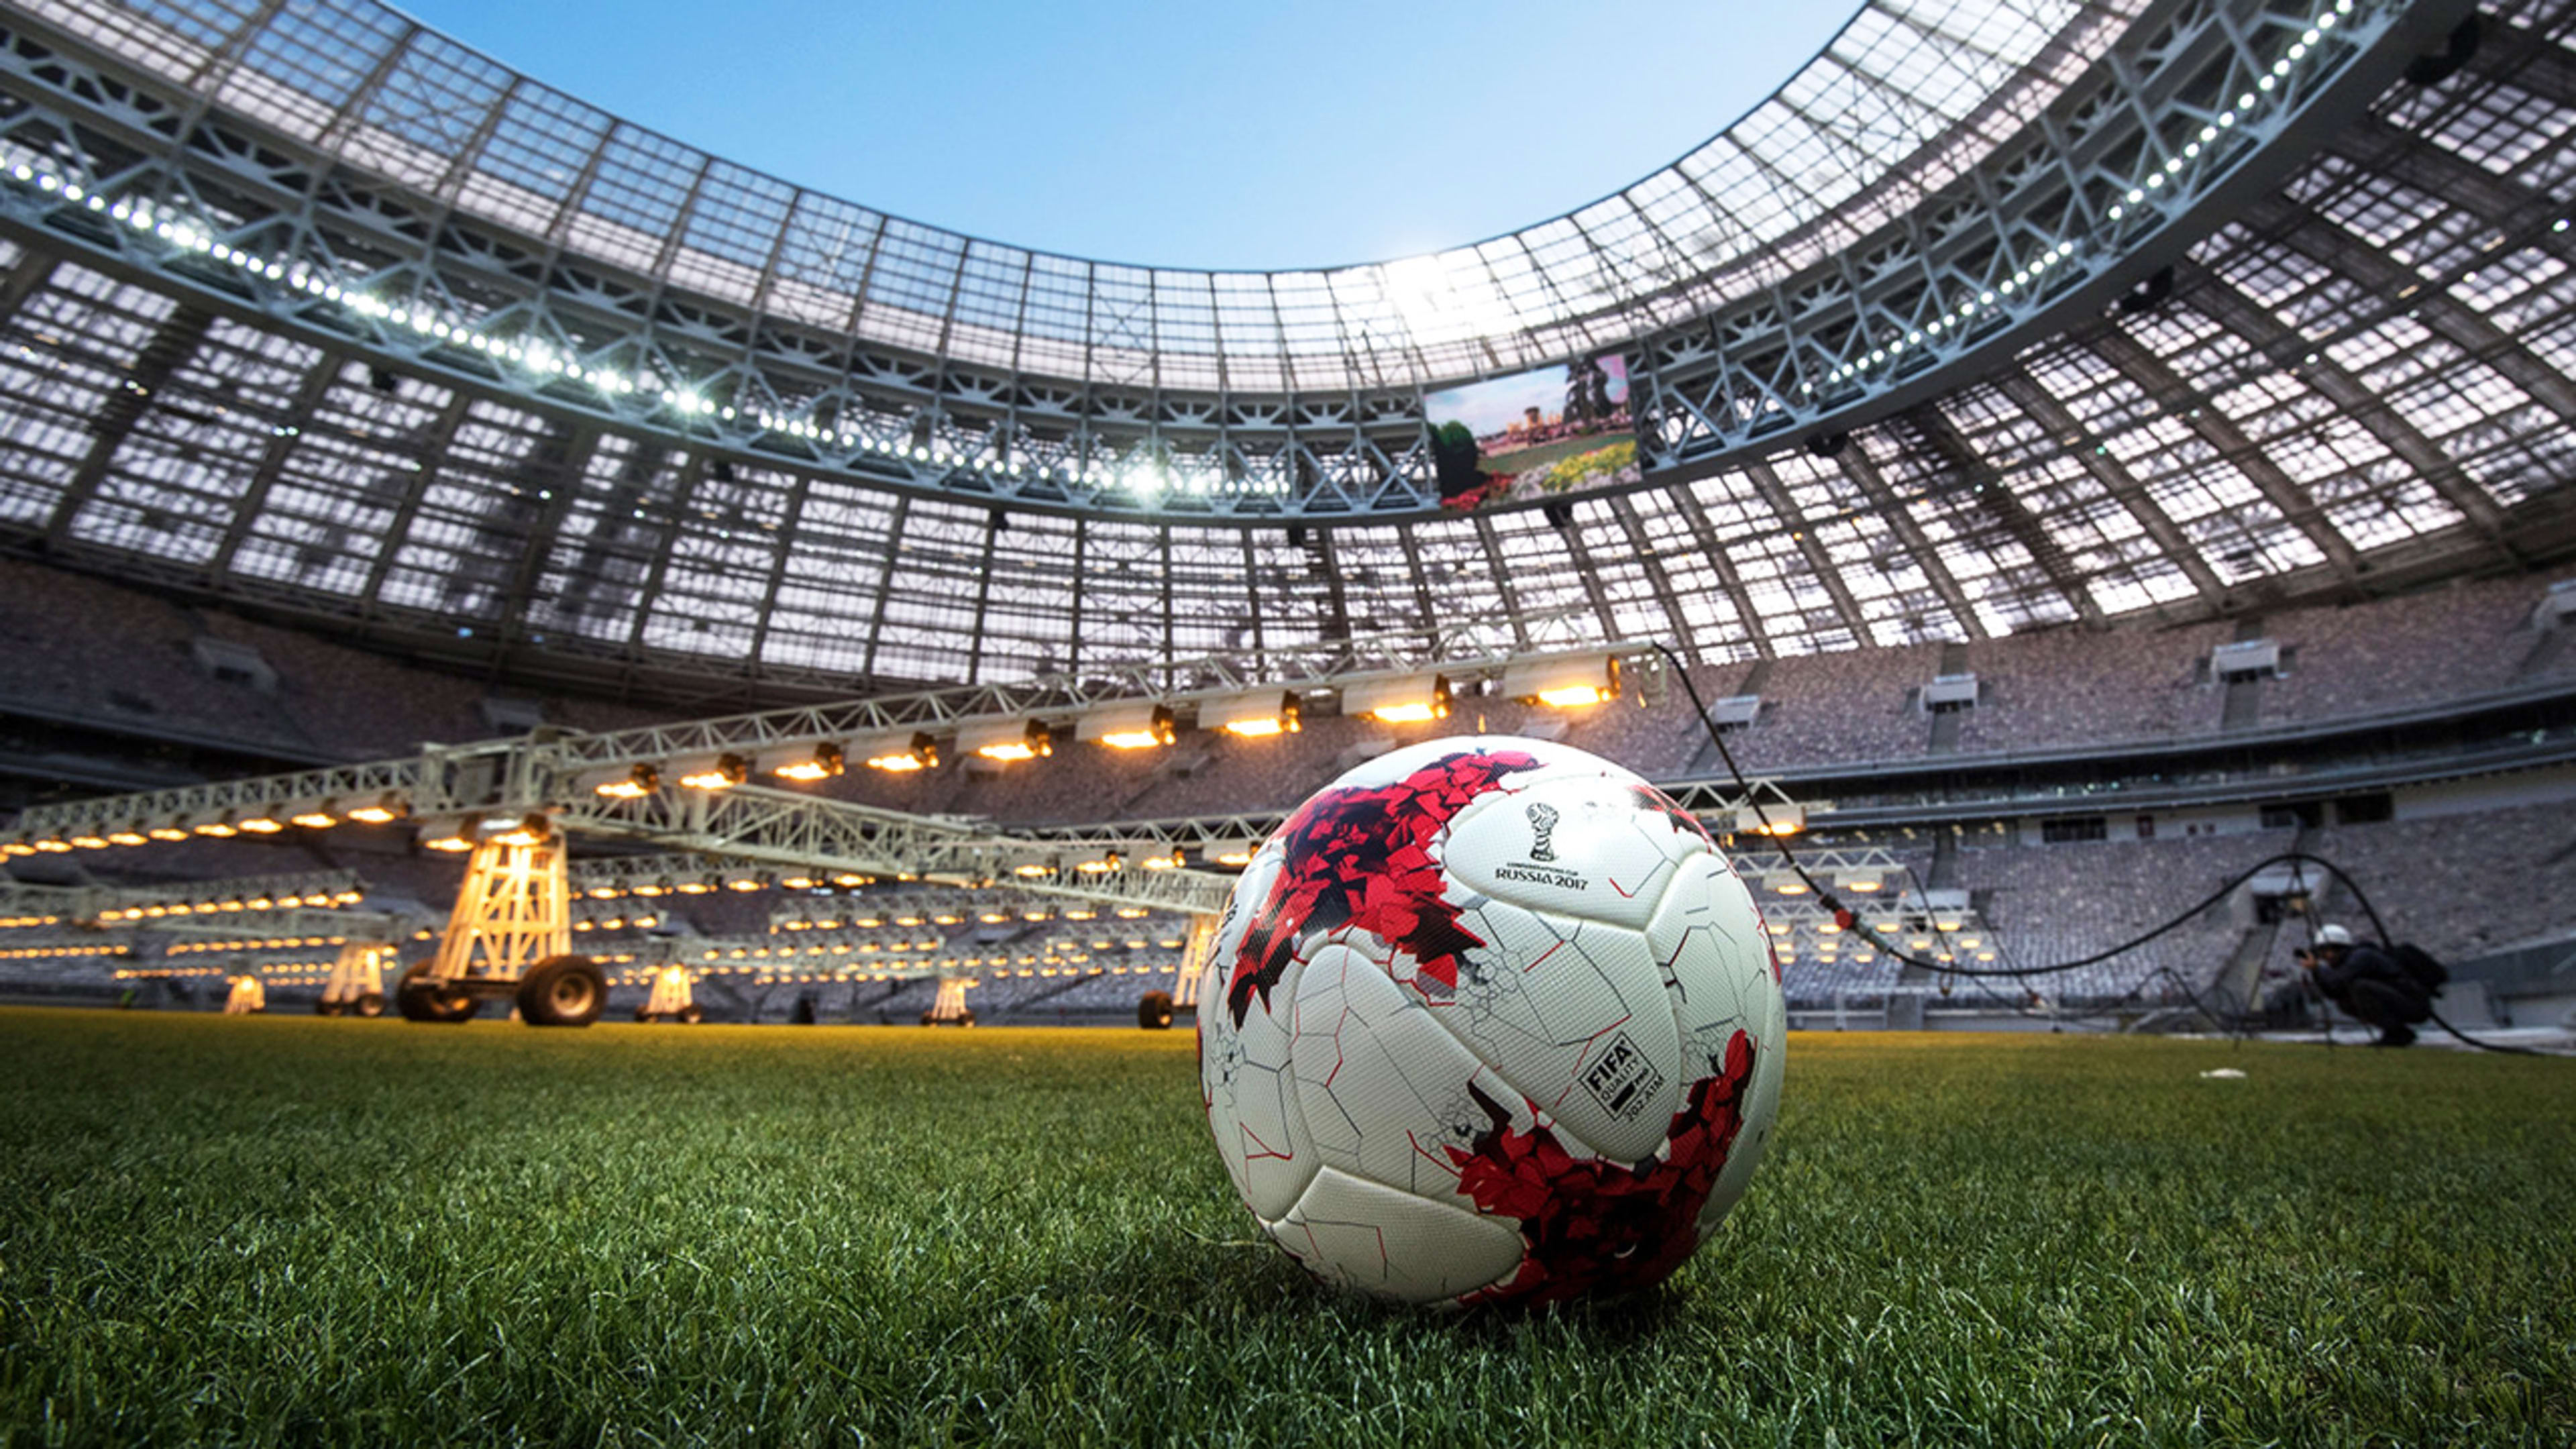 Brand strategy will beat serendipity on Twitter at World Cup